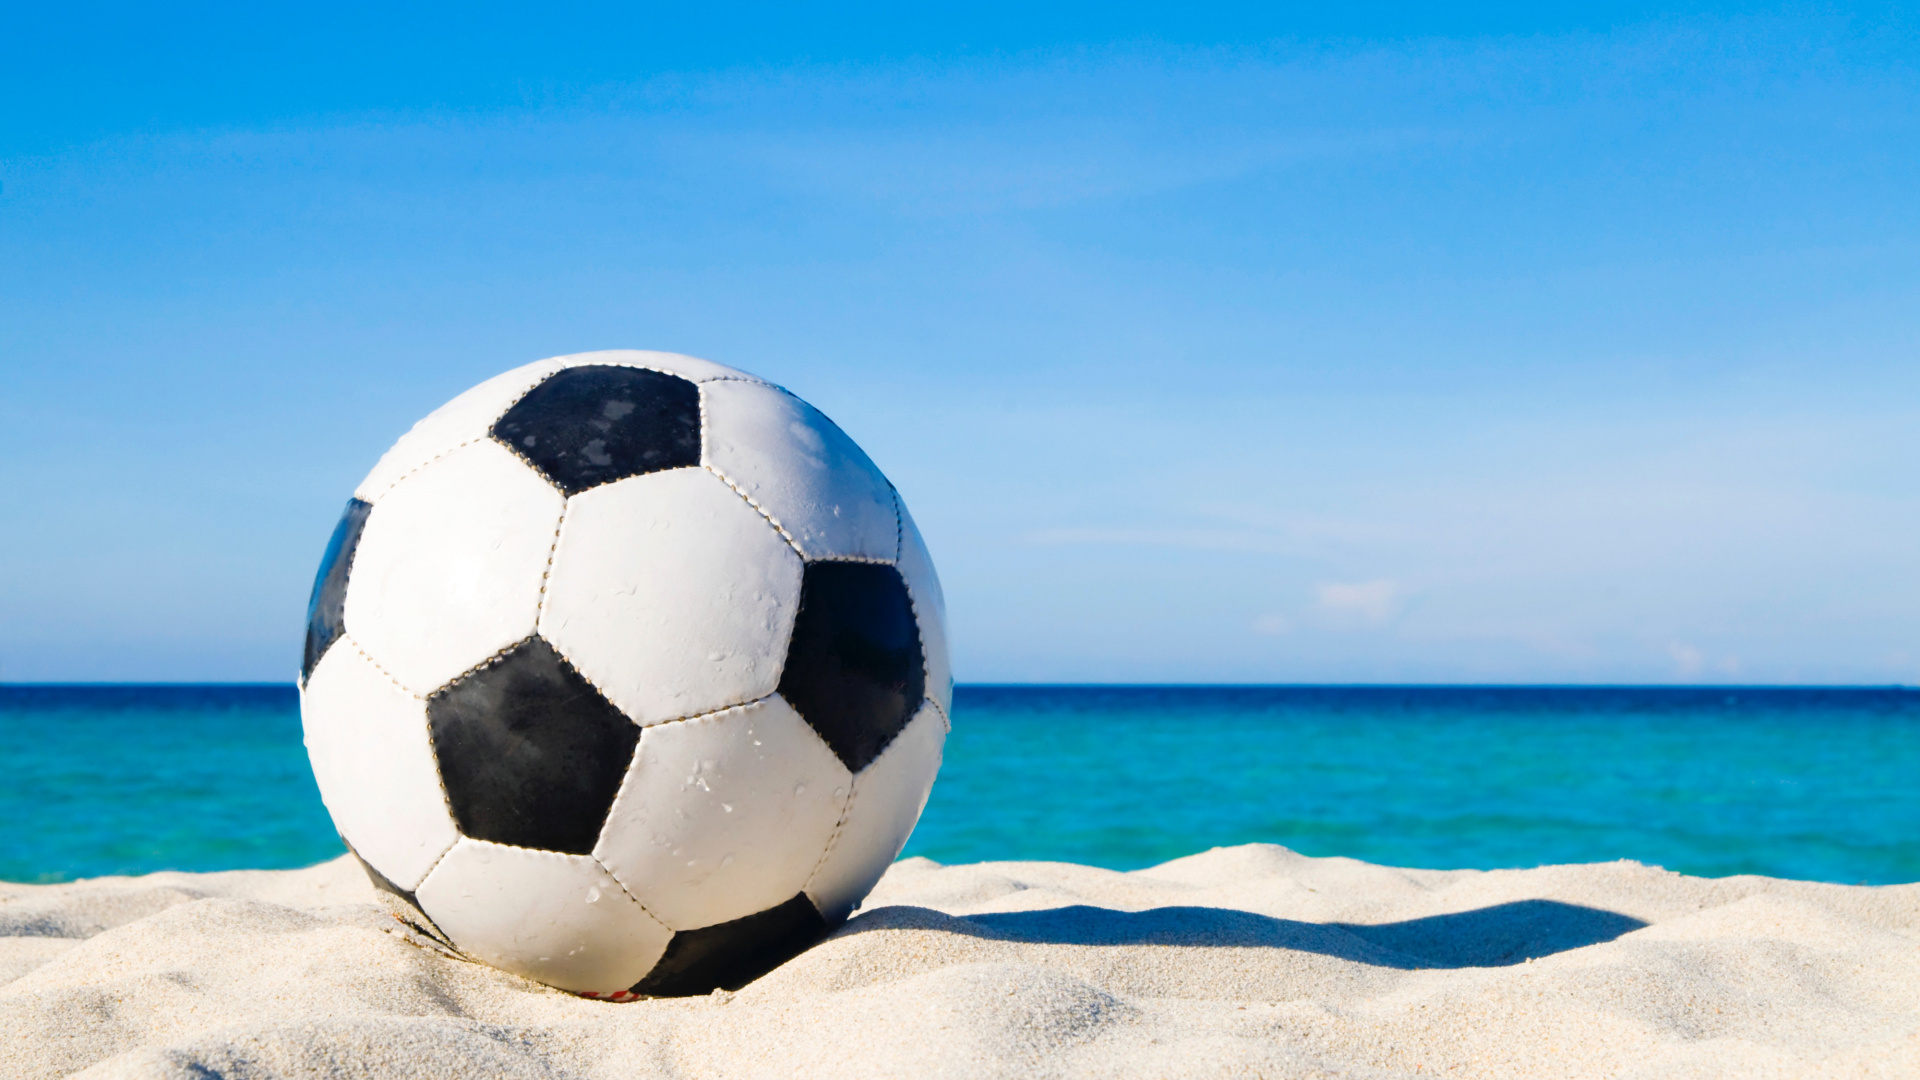 White and Black Soccer Ball on White Sand During Daytime. Wallpaper in 1920x1080 Resolution